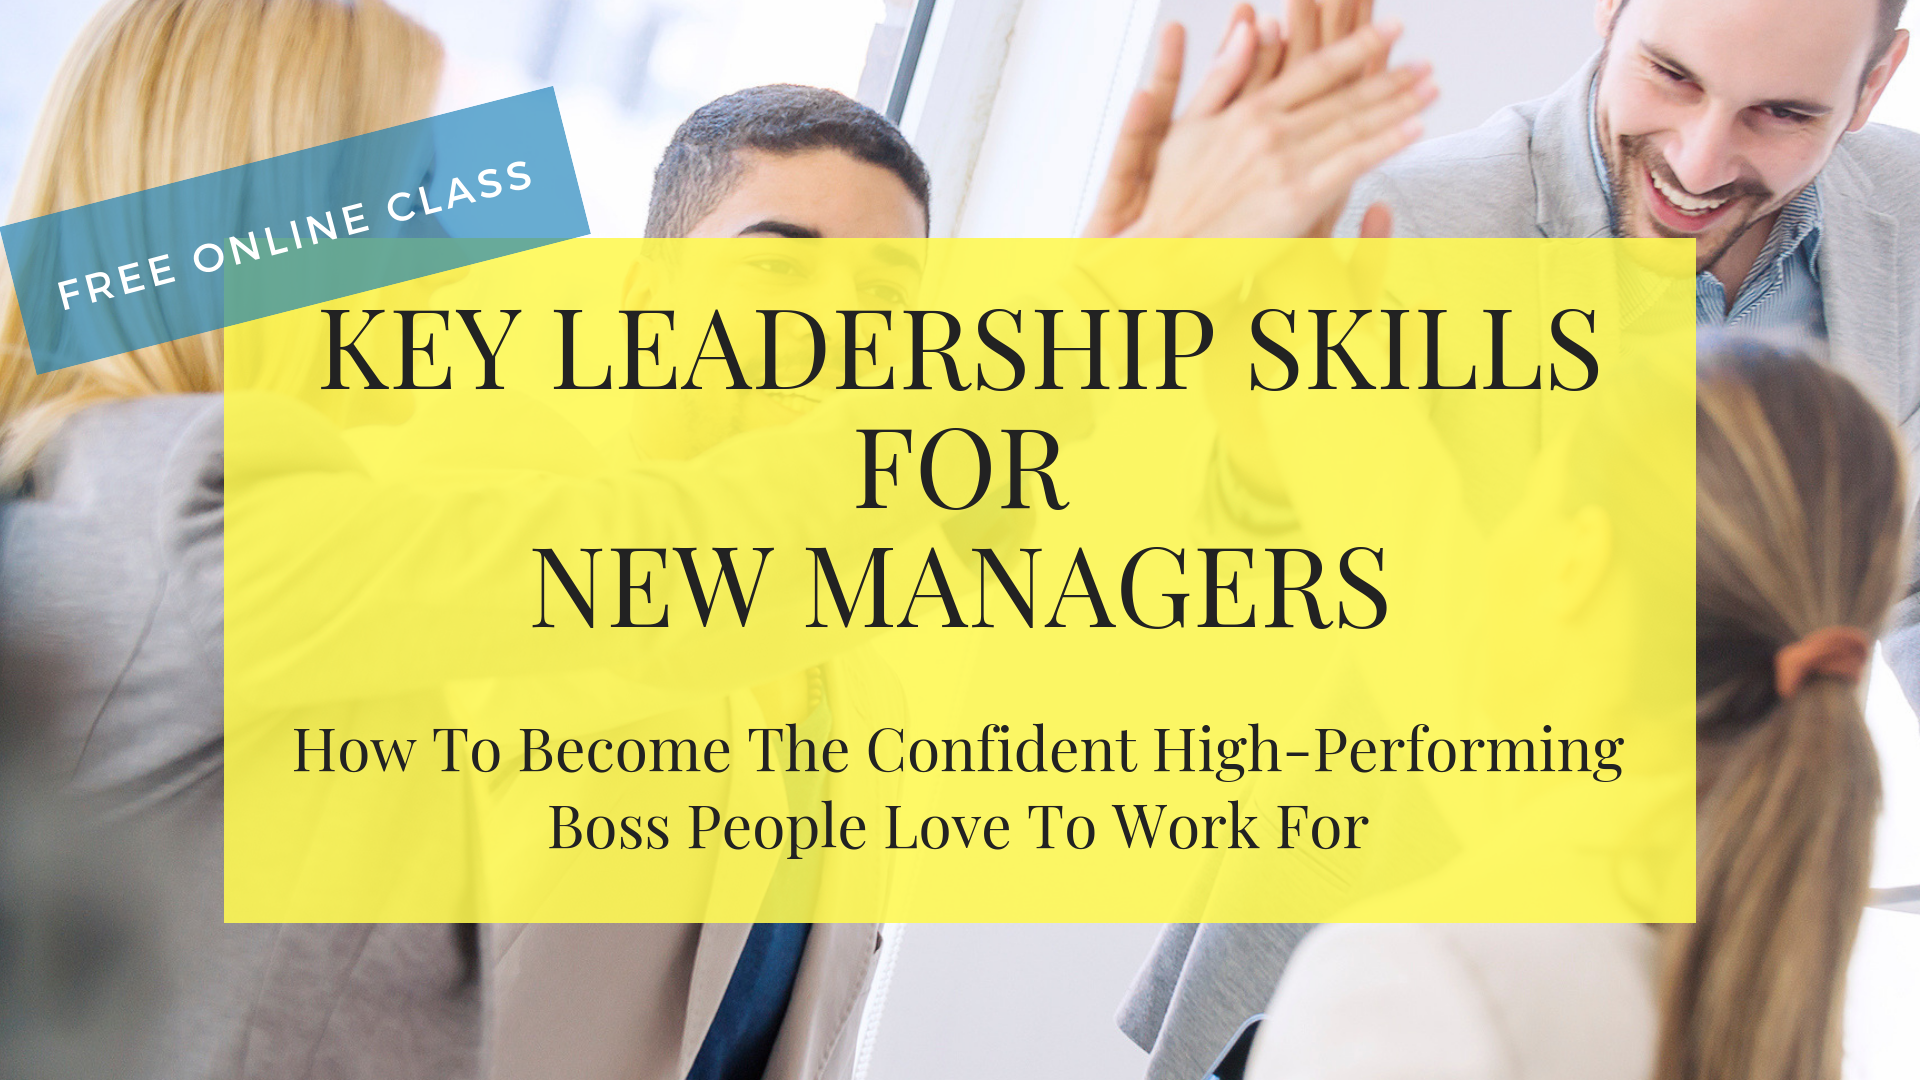 FREE Class: Key Leadership Skills for New Managers